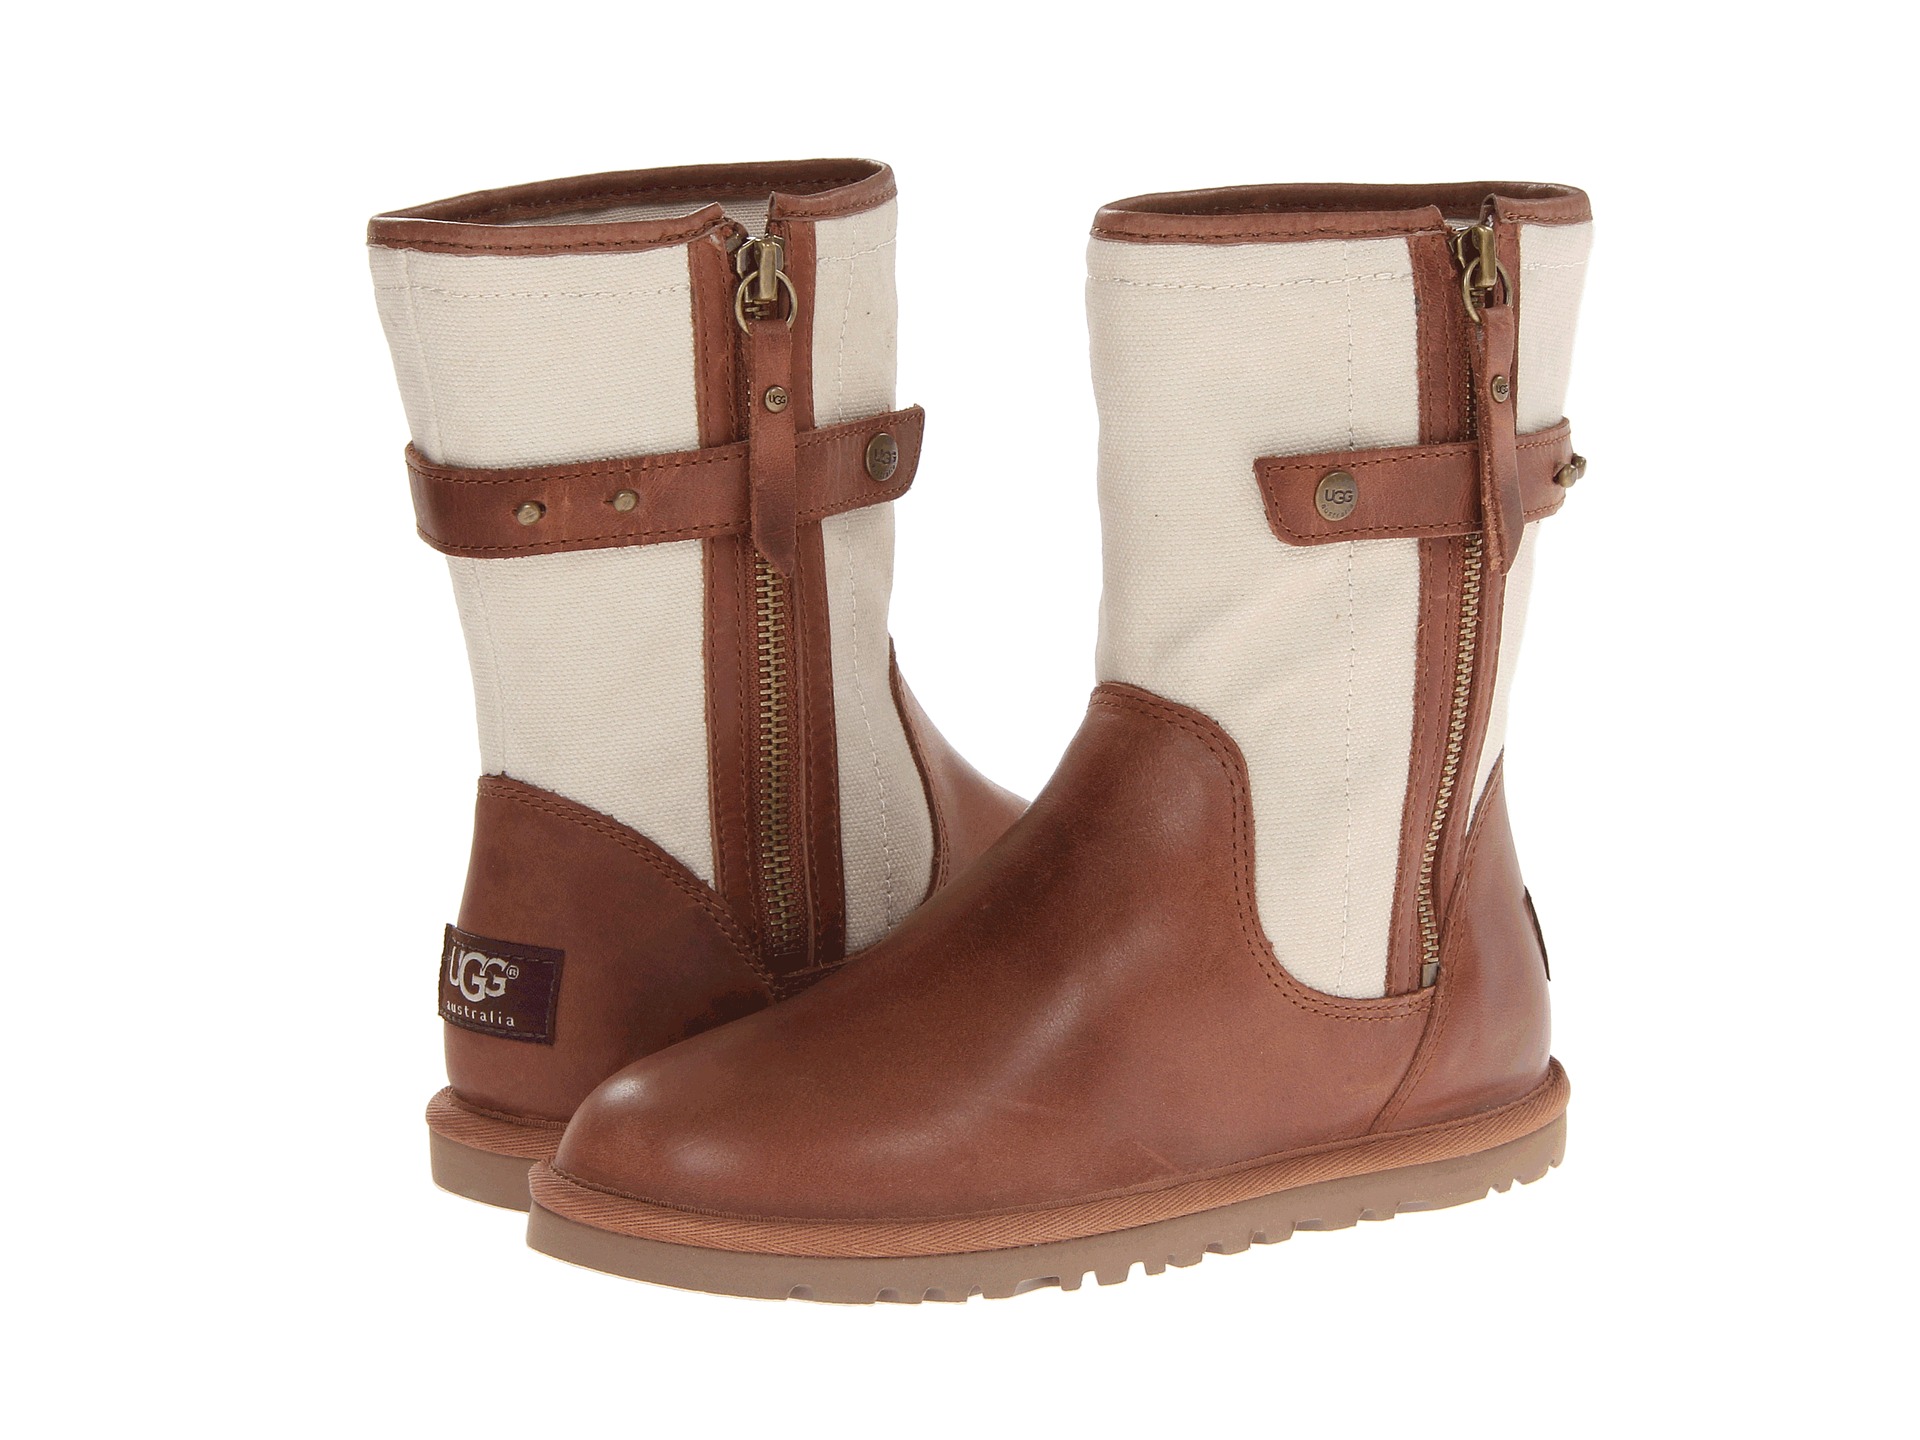 No results for ugg rosalie - Search Zappos